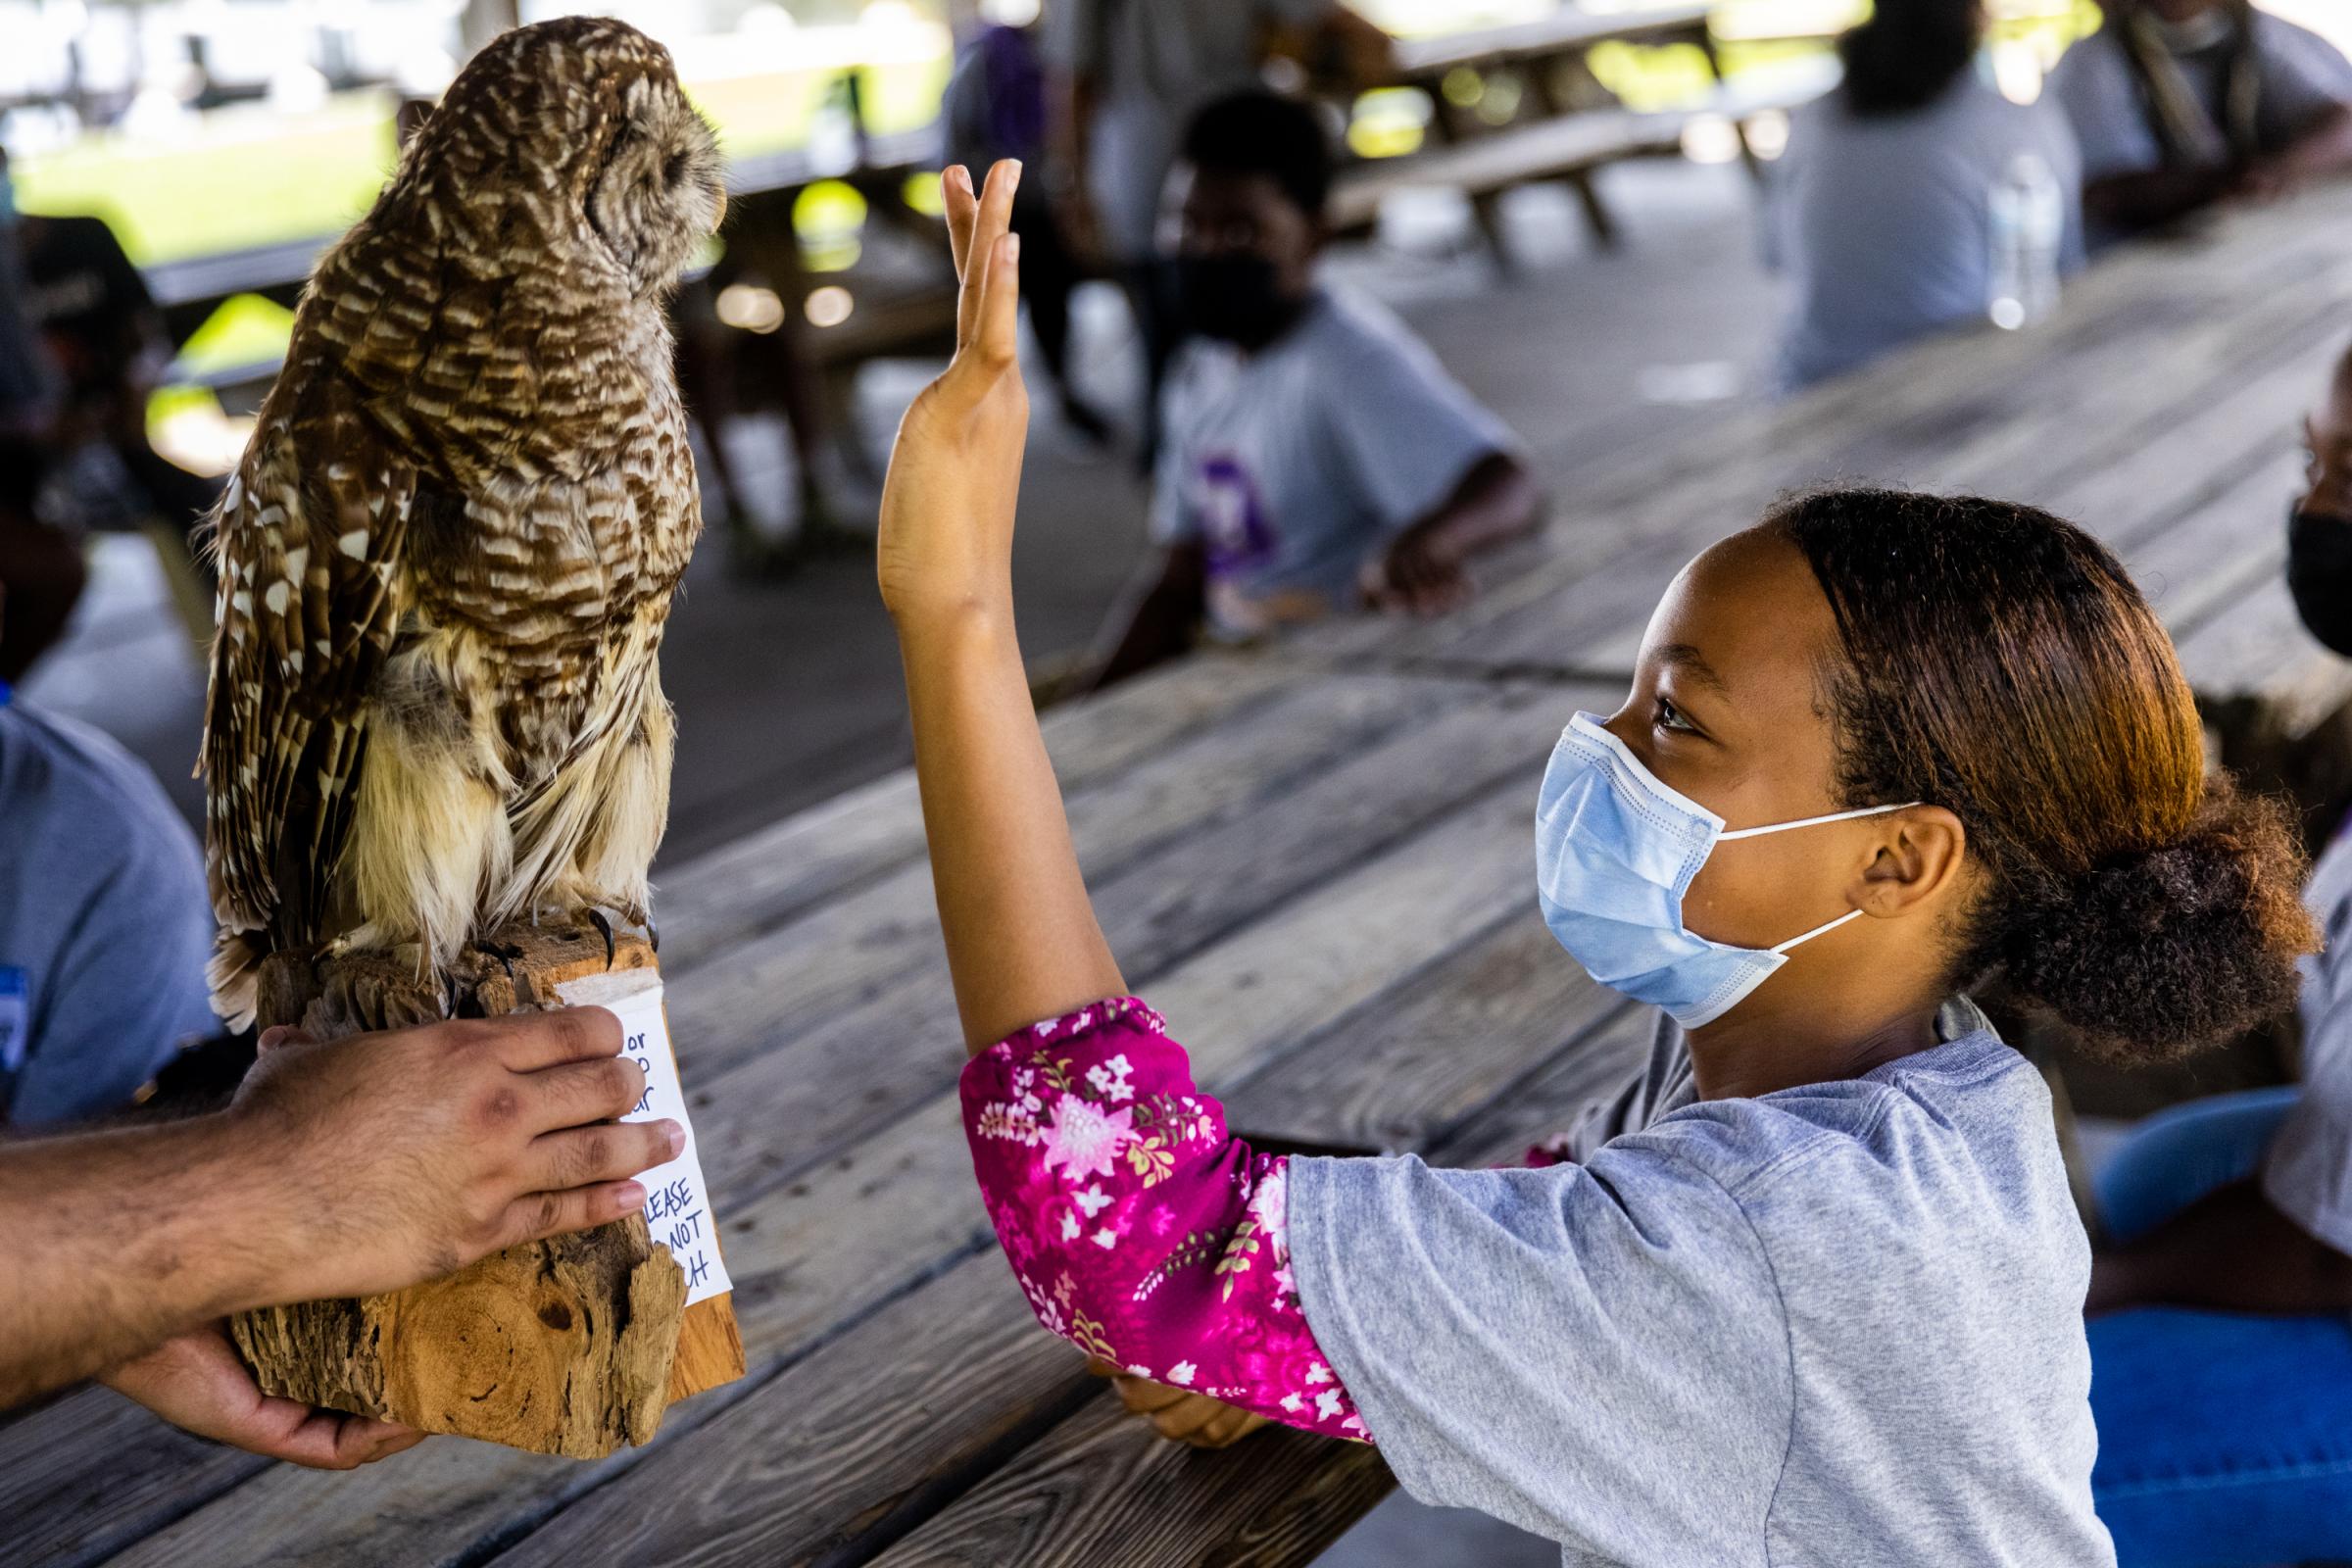 Brianna Dent reaches up to touch a taxidermied barred owl on August 11, 2021 in Turner Station Park. The owl was brought by the Patterson Park Audubon Center as a teaching aide for the kids of the Dunbar Brooks Empowerment Camp. Dent was originally afraid to touch the owl but asked for it to be brought back so she could touch it after a few minutes.